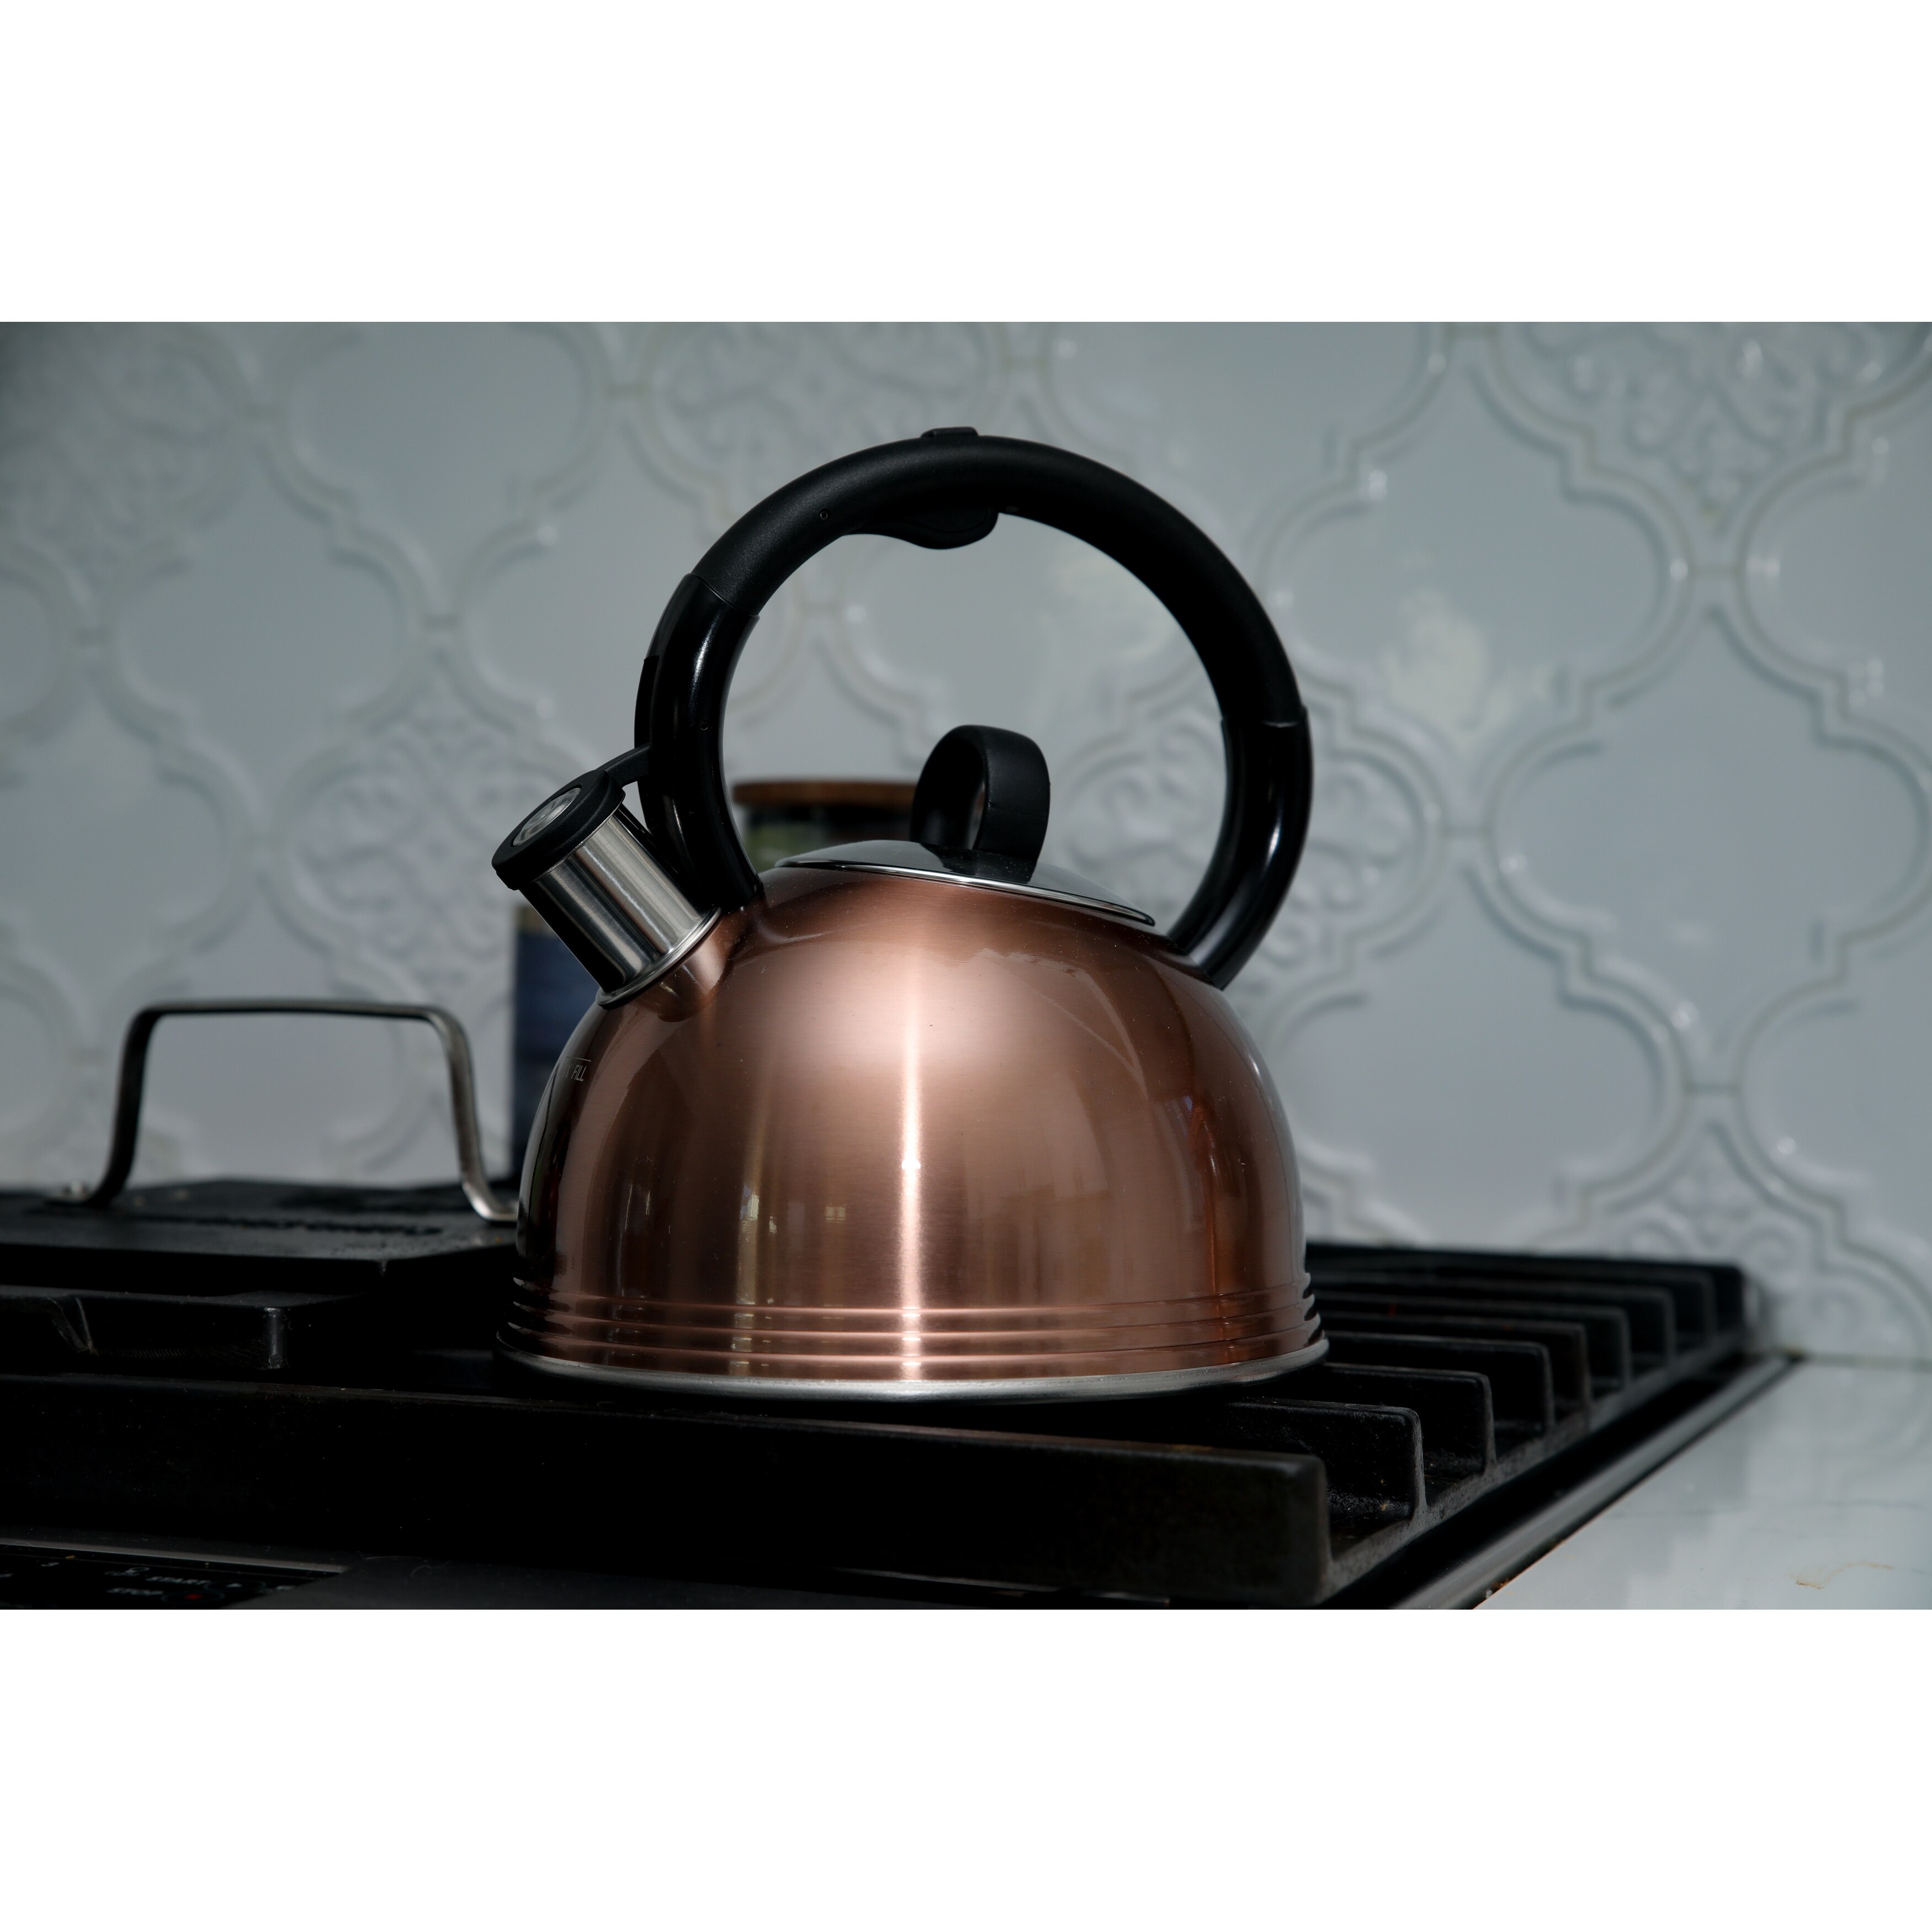 Copco 2.1 Qt Whistling Stainless Steel Tea Kettle With Bpa Free Handle,  Copper : Target